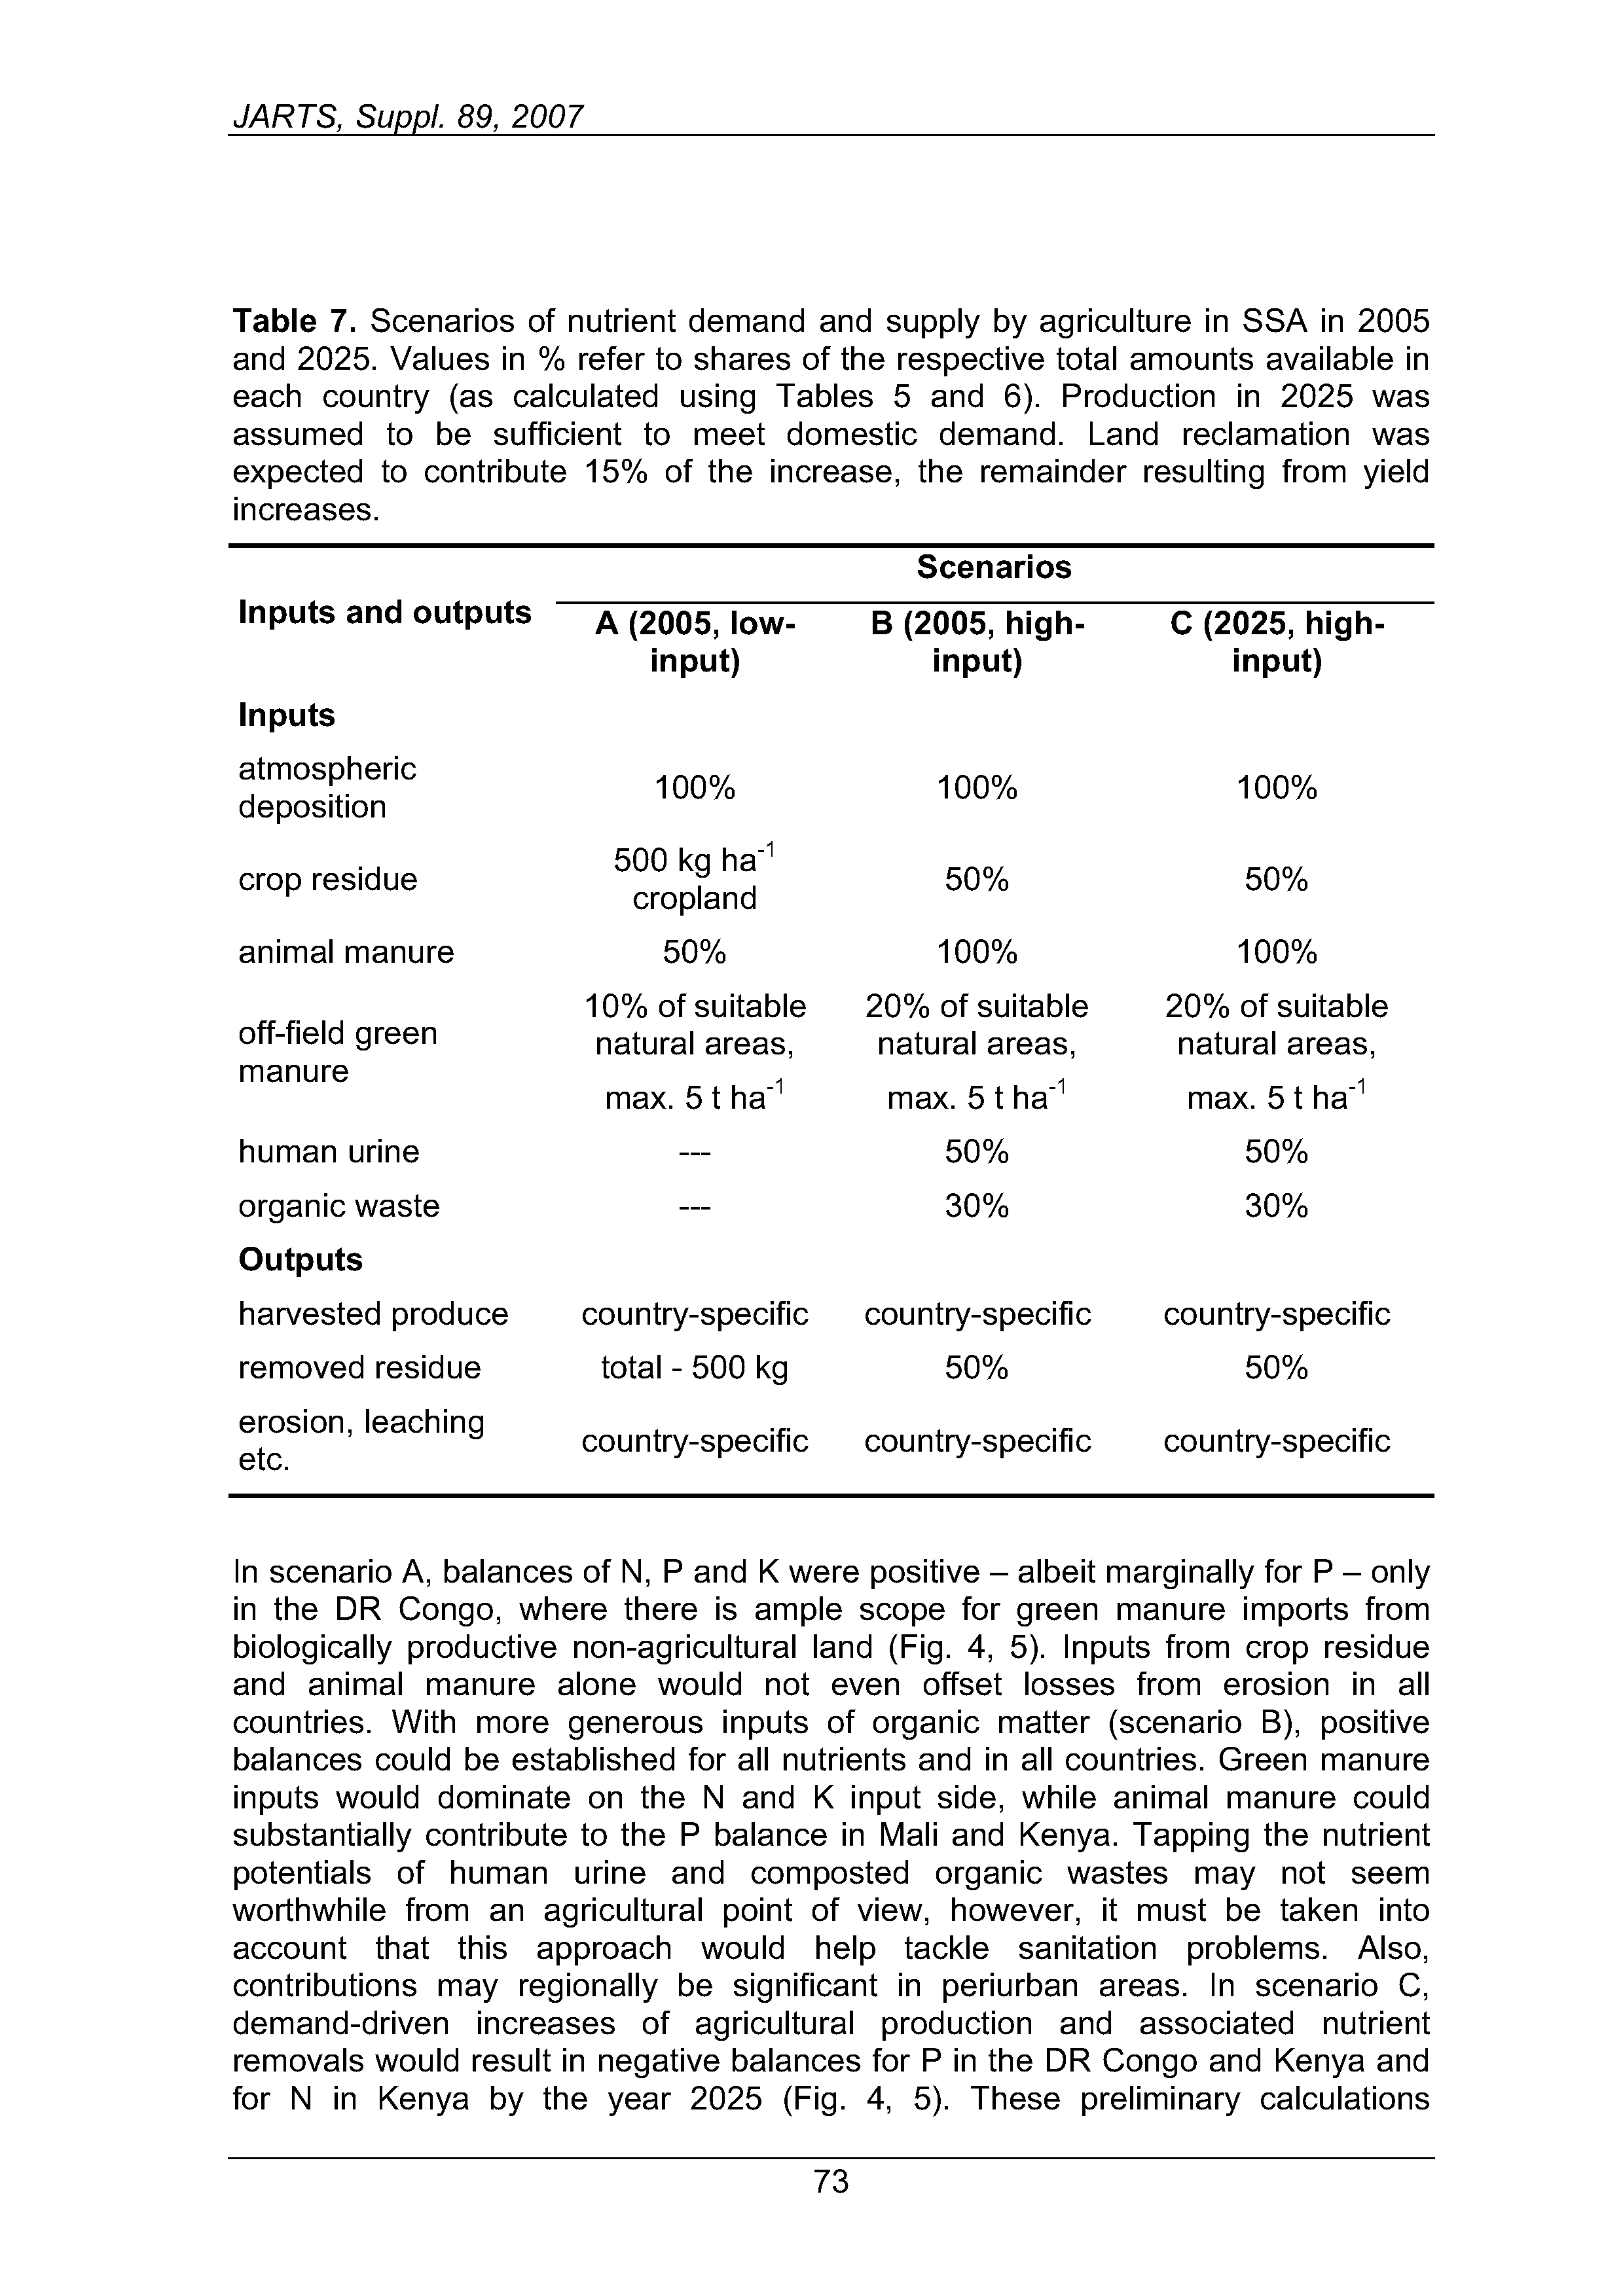 Table 7. Scenarios of nutrient demand and supply by agriculture in SSA in 2005 and 2025. Values in % refer to shares of the respective total amounts available in each country (as calculated using Tables 5 and 6). Production in 2025 was assumed to be sufficient to meet domestic demand. Land reclamation was expected to contribute 15% of the increase, the remainder resulting from yield increases.